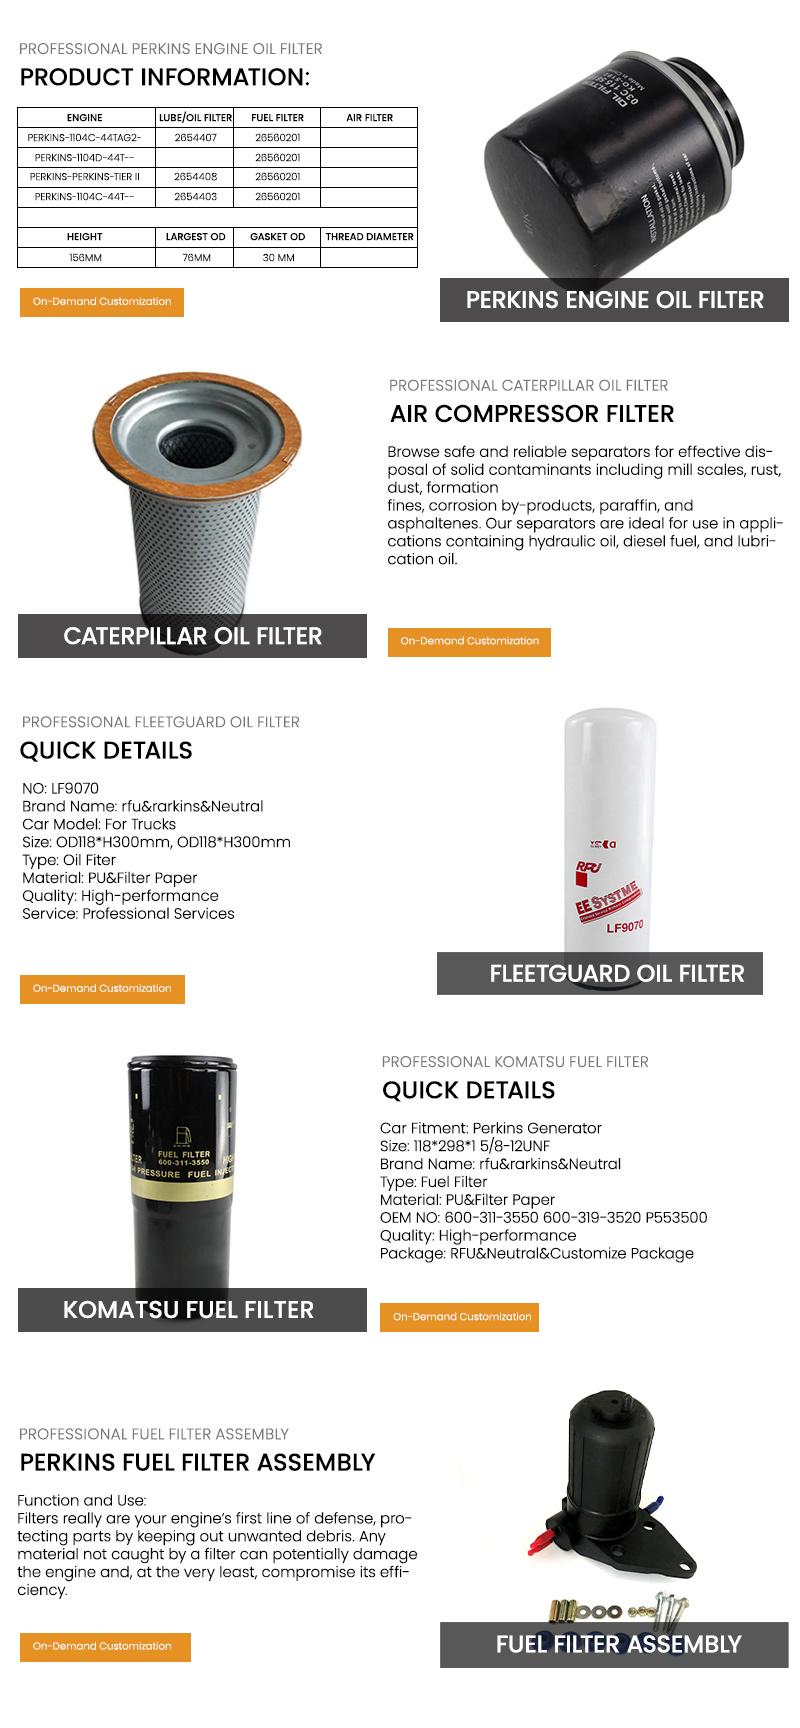 High Quality Oil Filter 5I-7950 for Caterpillar Engine-Auto Parts